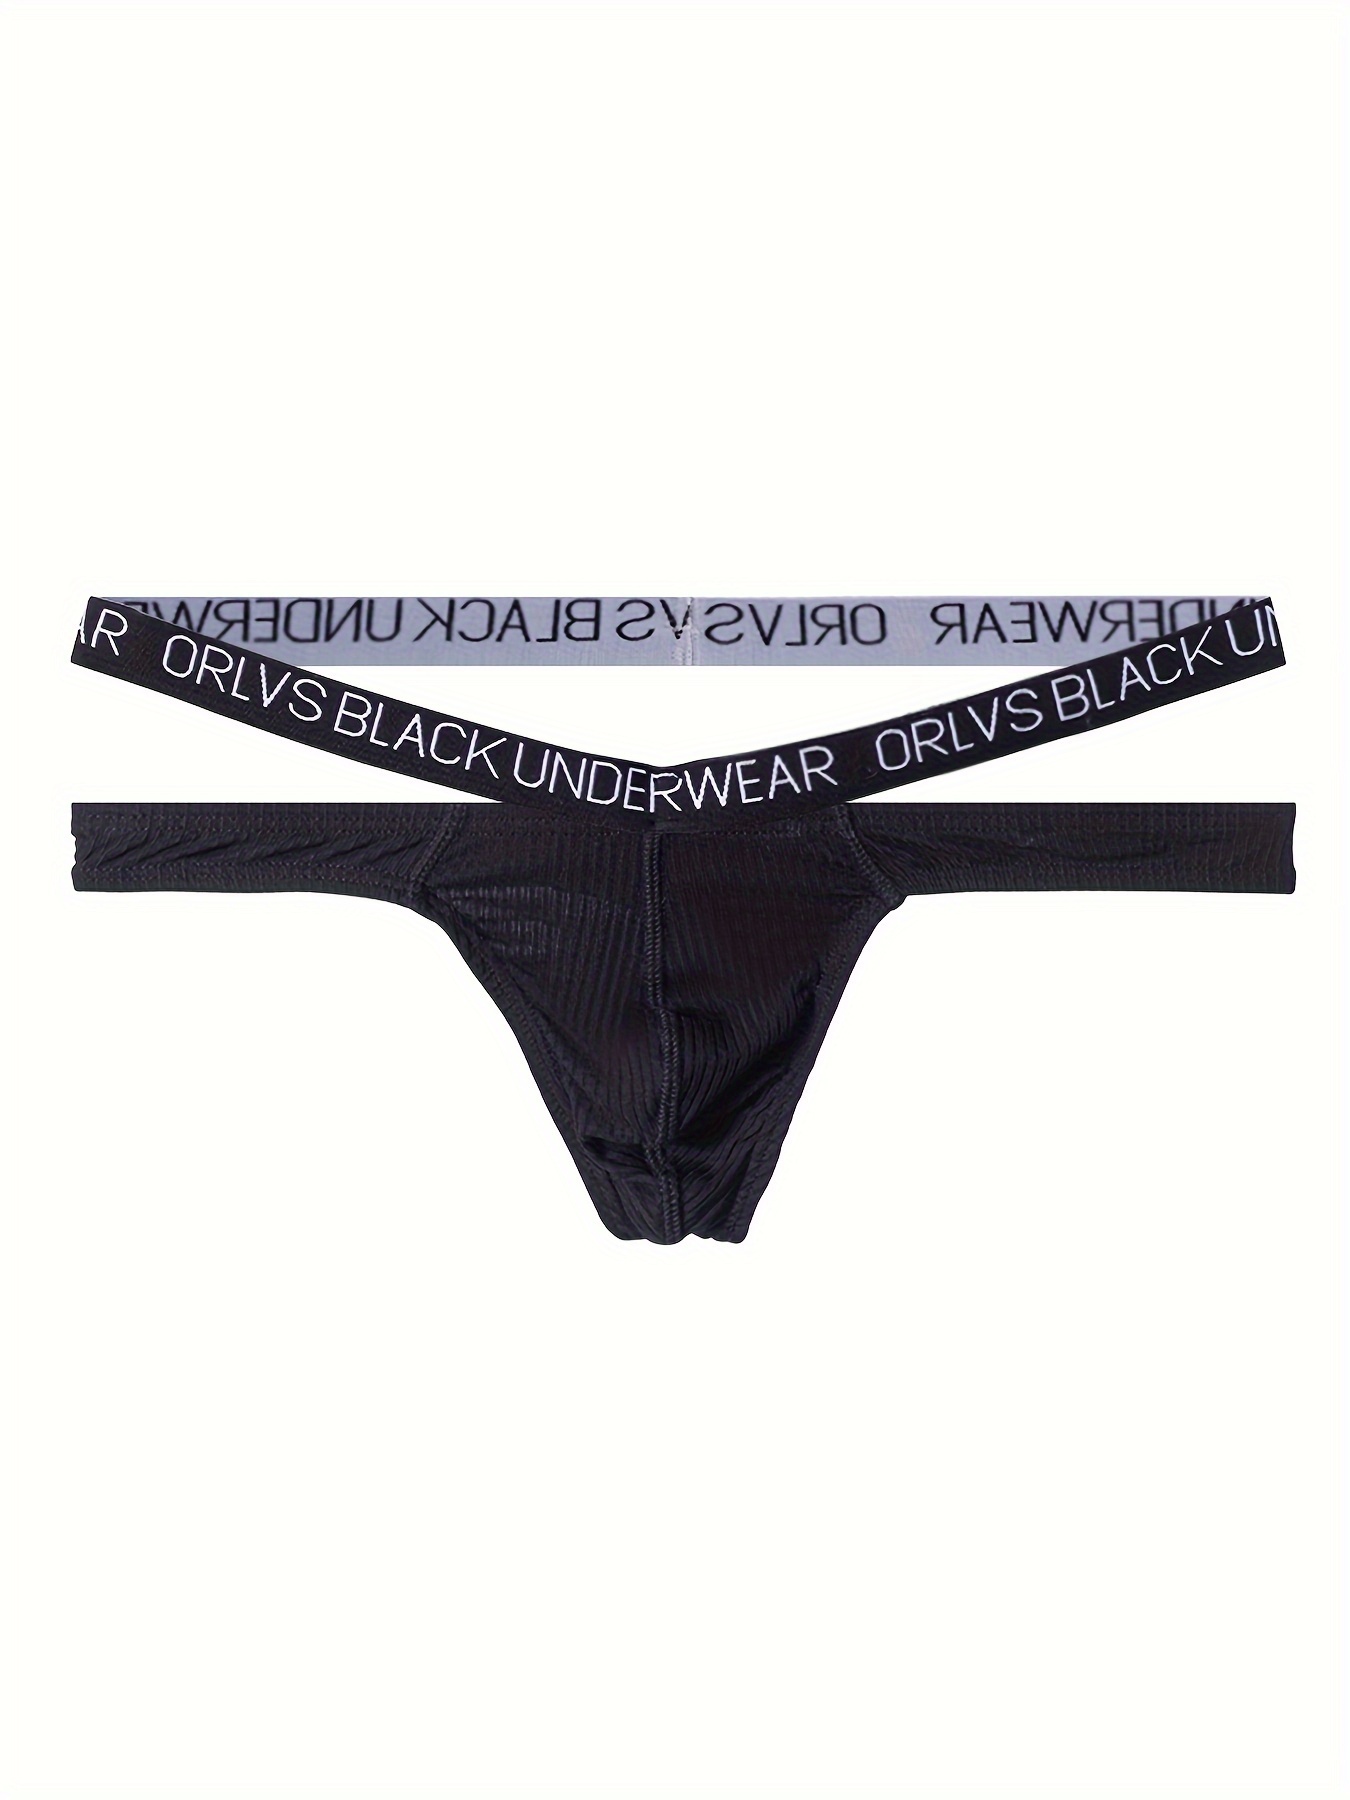 Men's Sexy G-strings & Thongs Lace Transparent Underwear